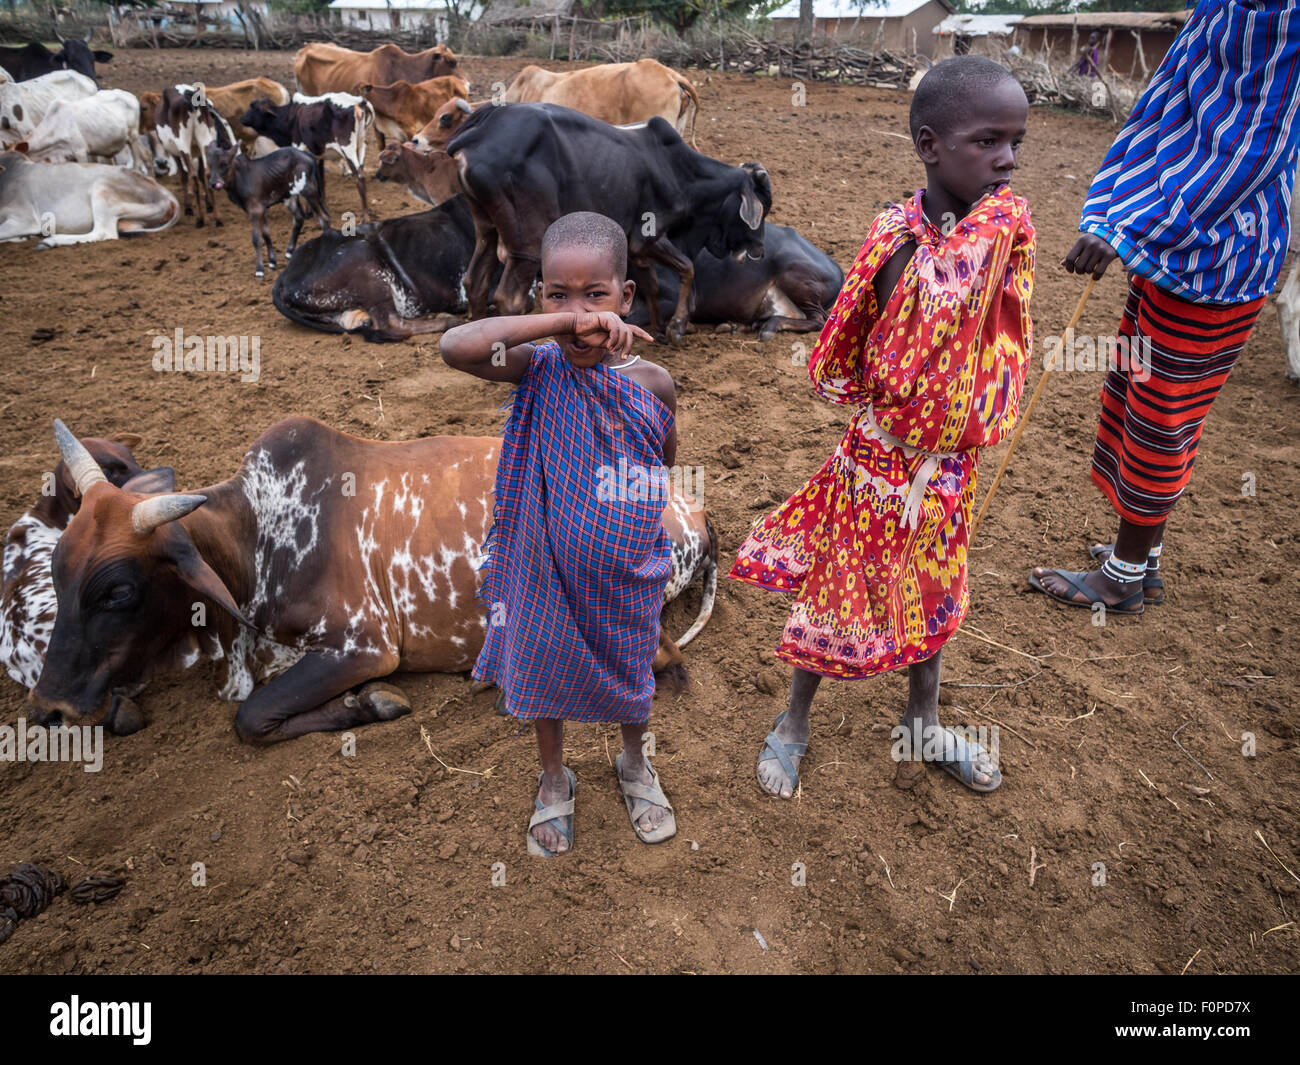 Children with their cattle in Maasai boma (village) in Tanzania, Africa. Stock Photo